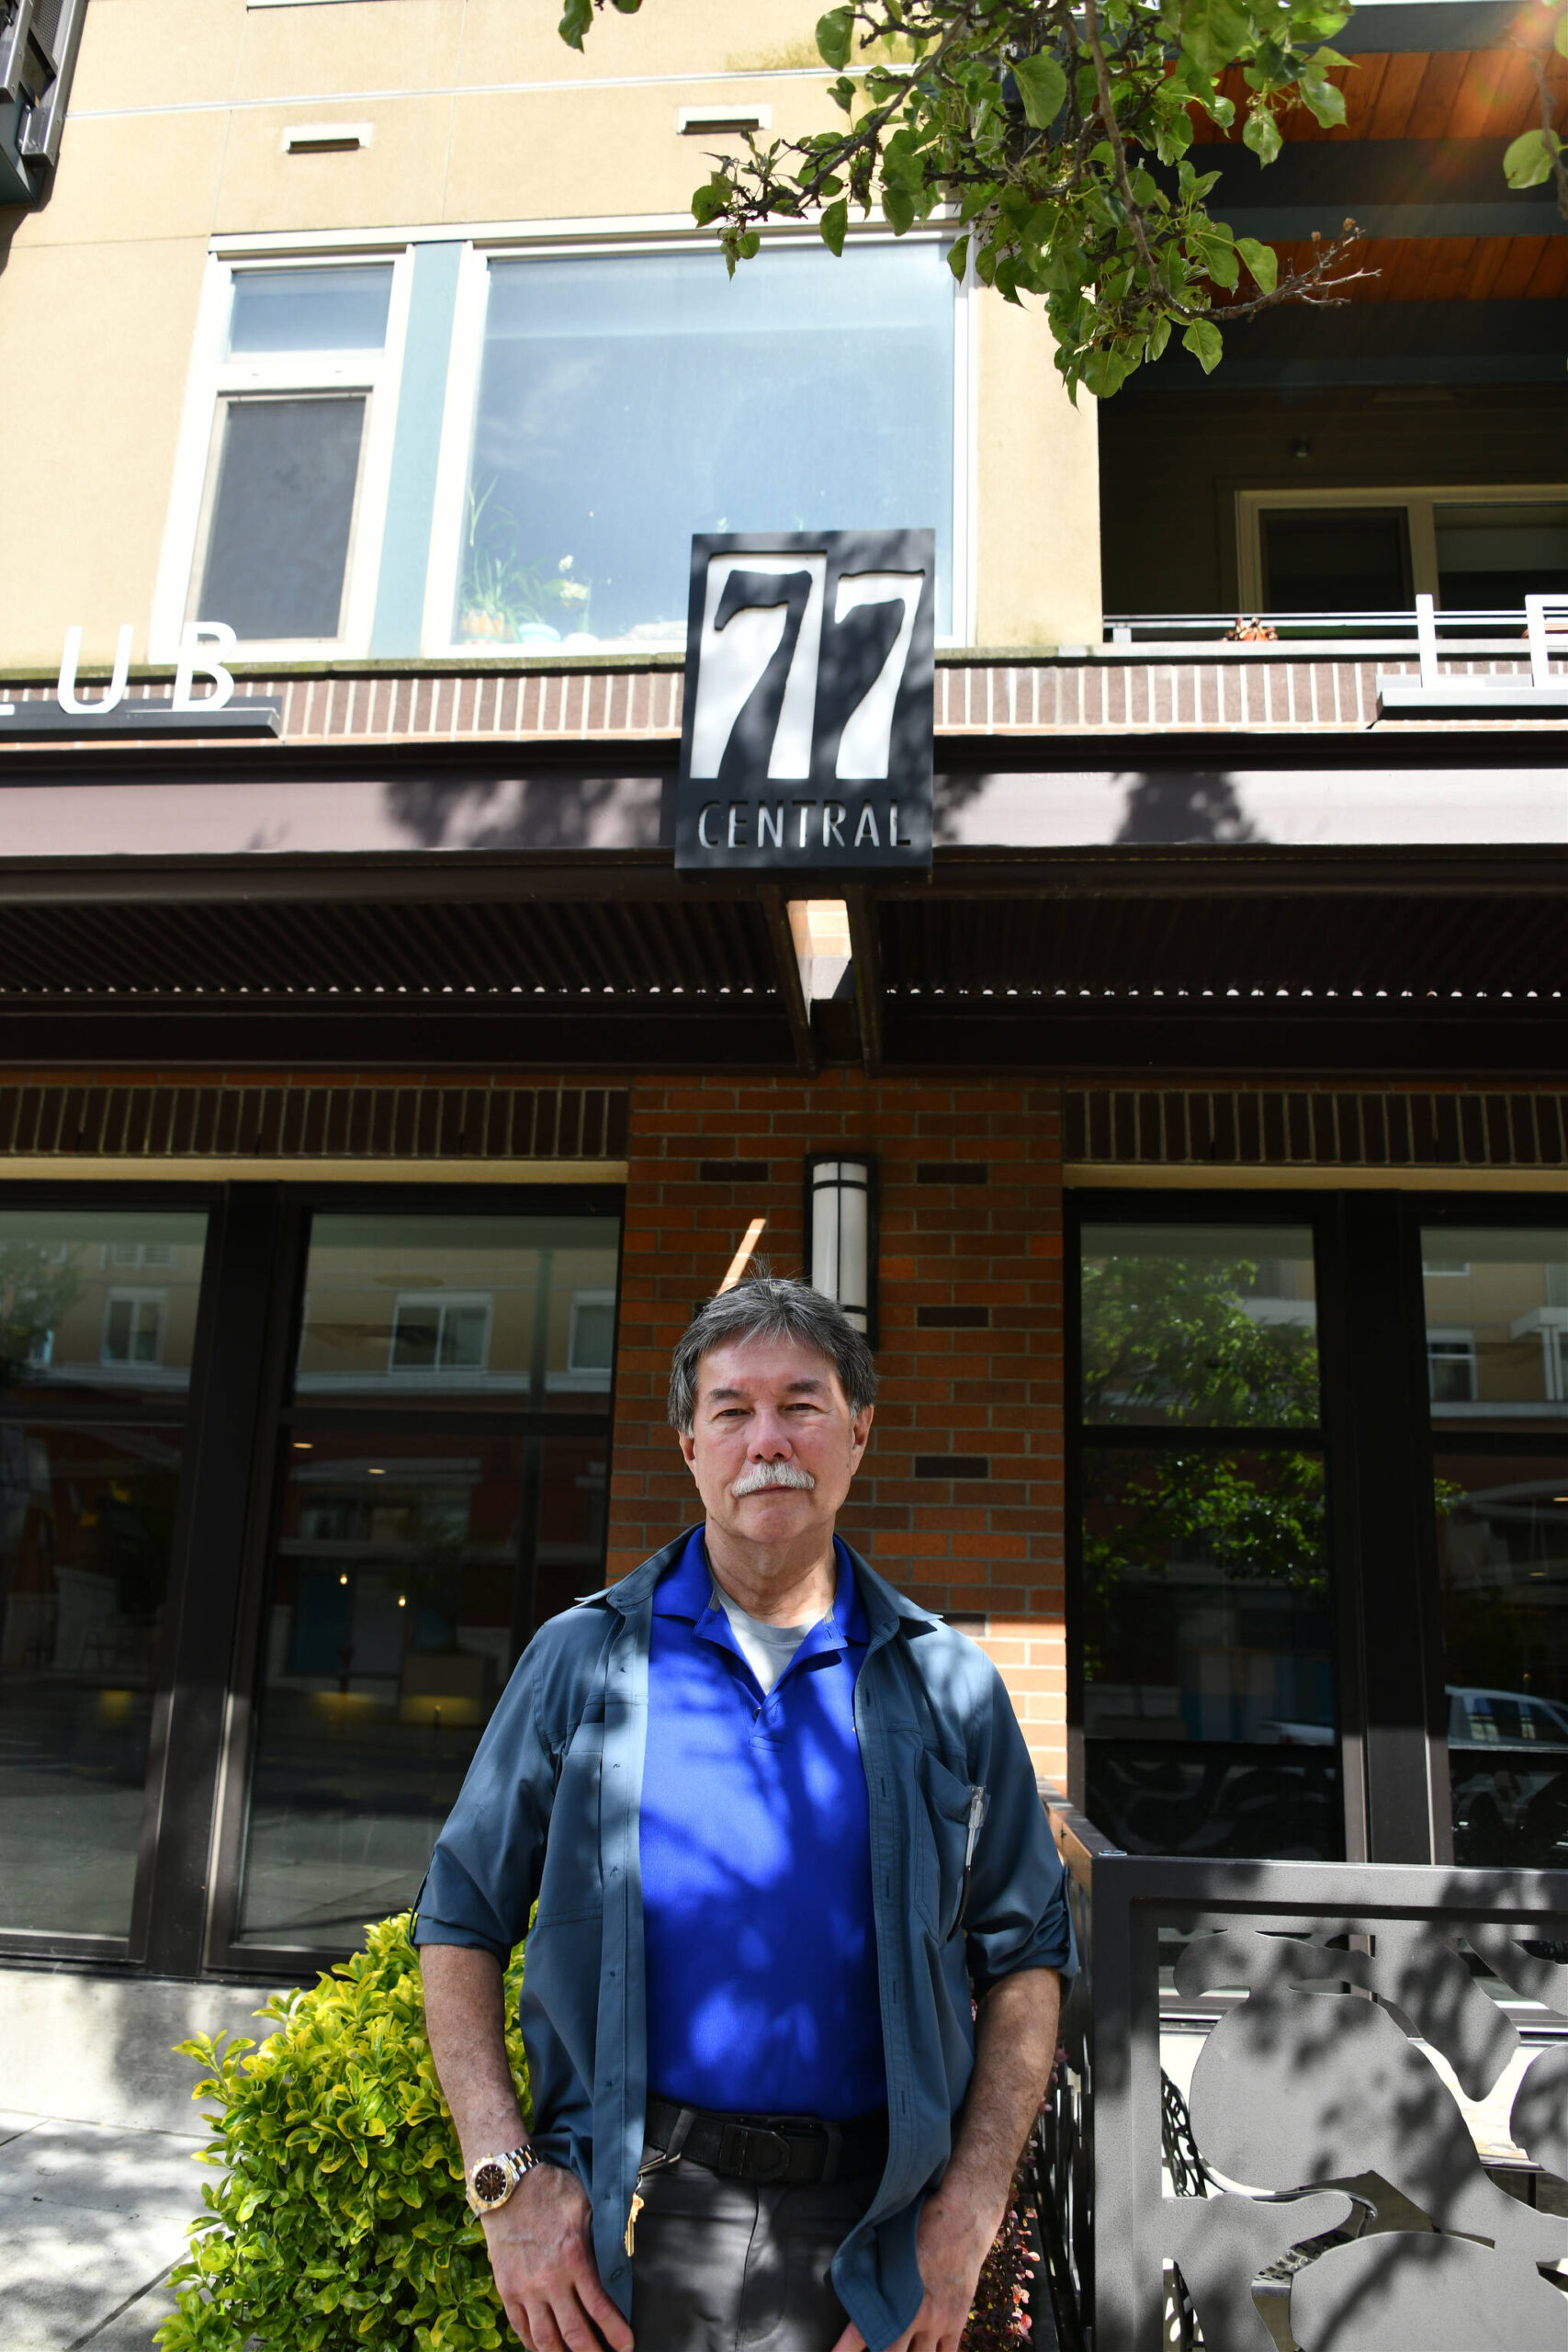 Former 77 Central resident Bob Gilbert stands in front of the Mercer Island building on the afternoon of May 9. Andy Nystrom/ staff photo